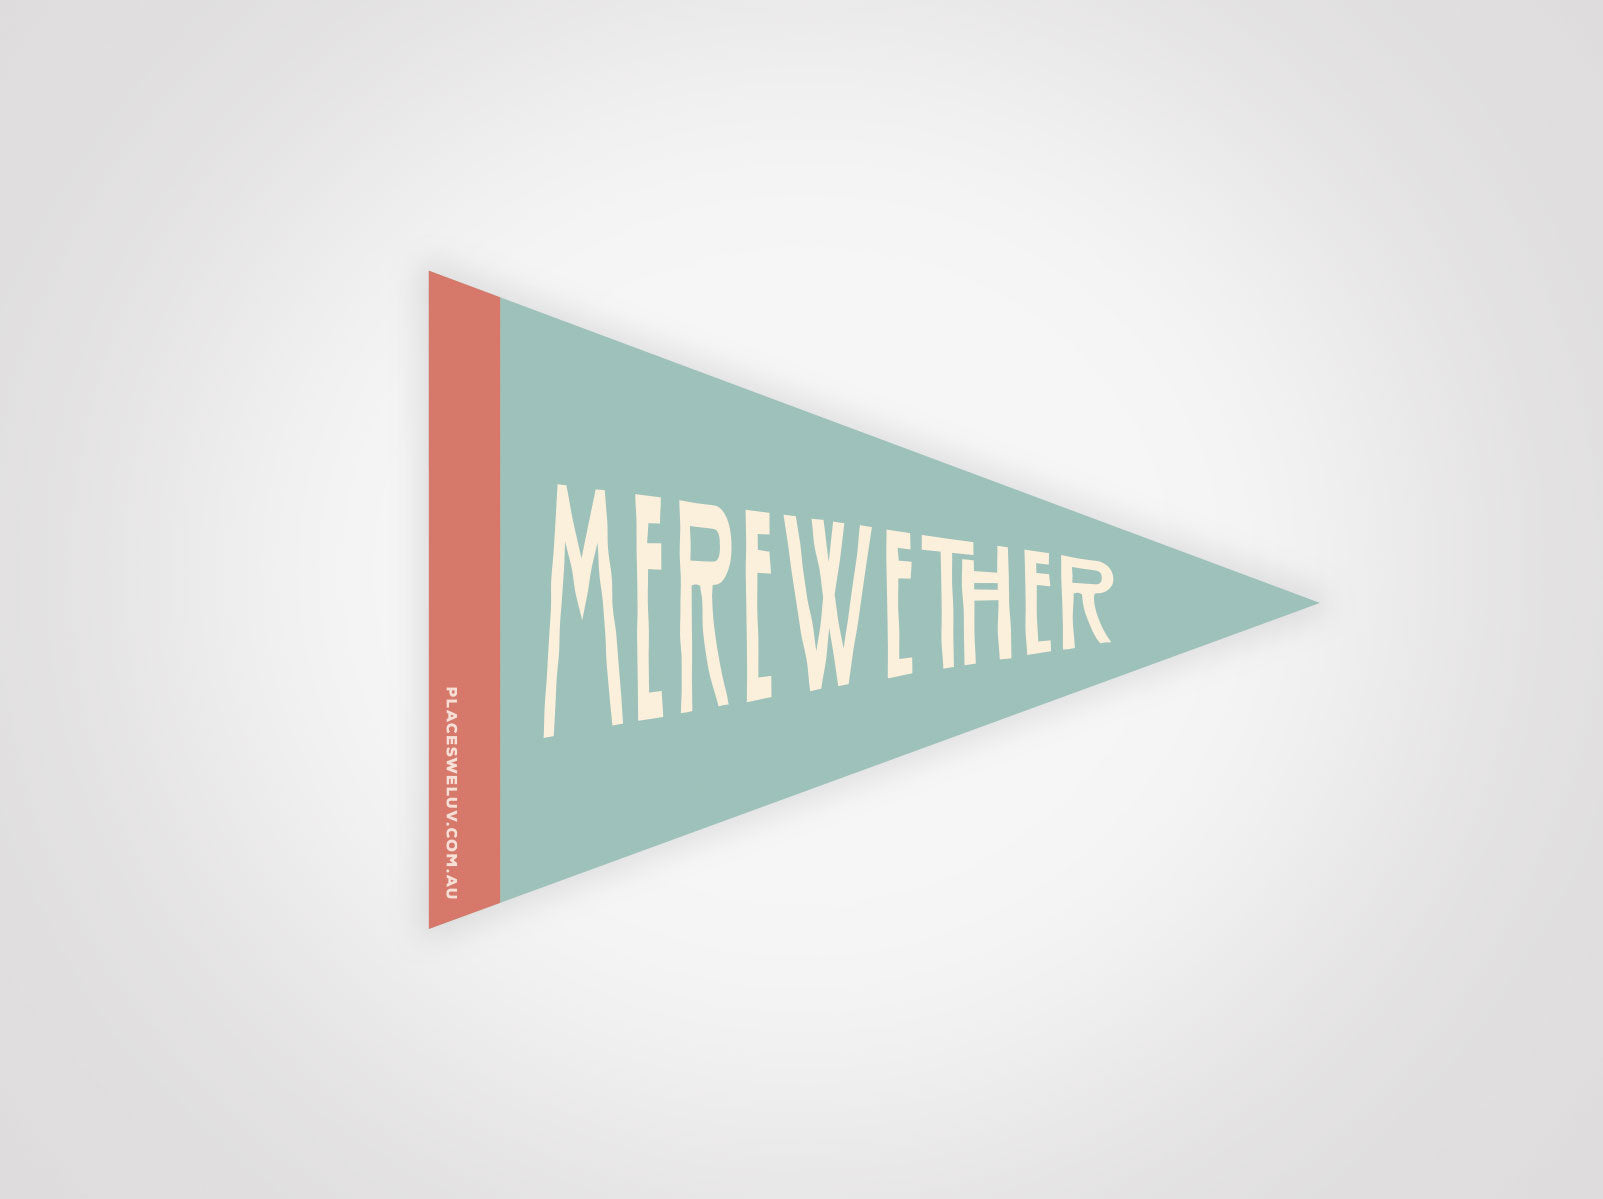 Merewether vintage travel style flag decal by places we luv